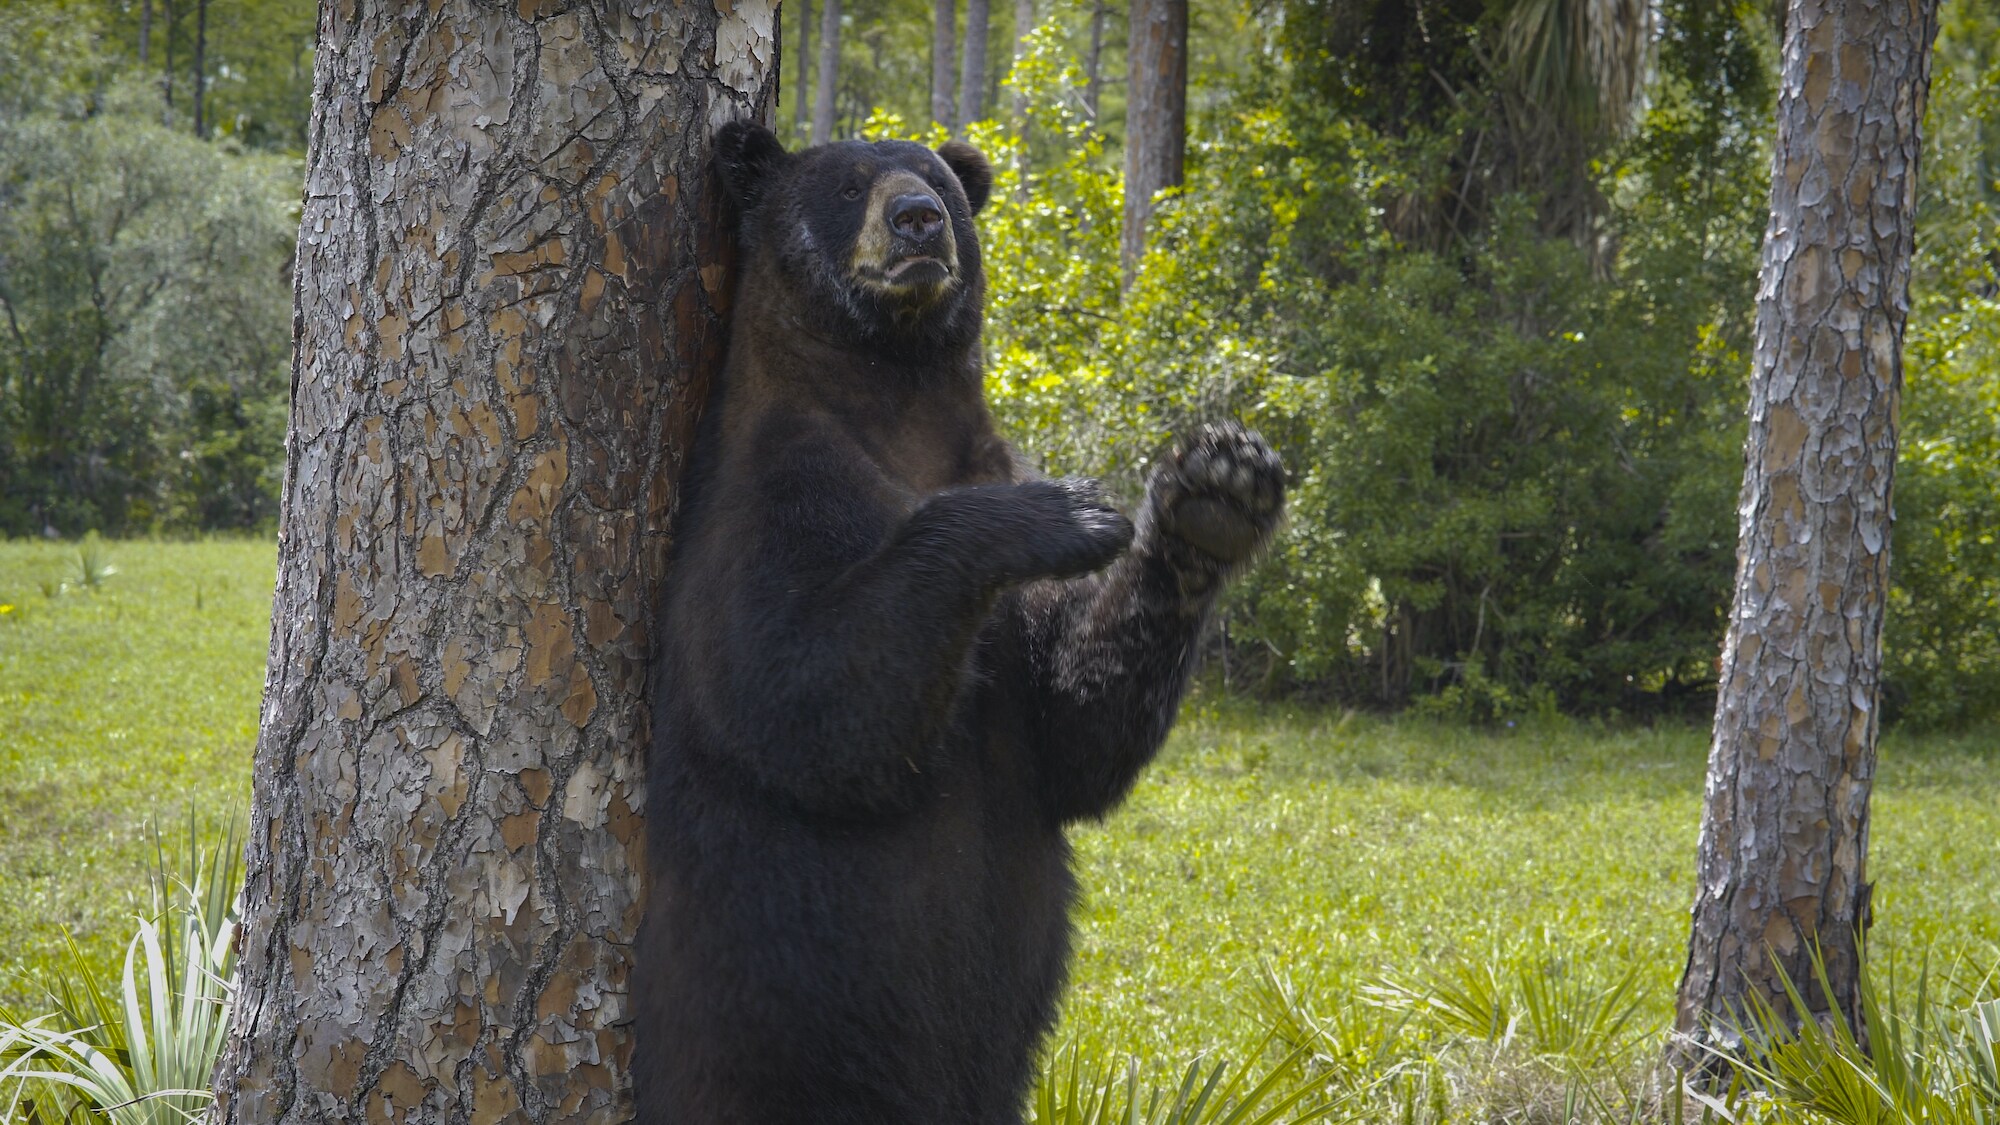 A black bear uses a tree to scratch off his winter coat. (National Geographic for Disney+)